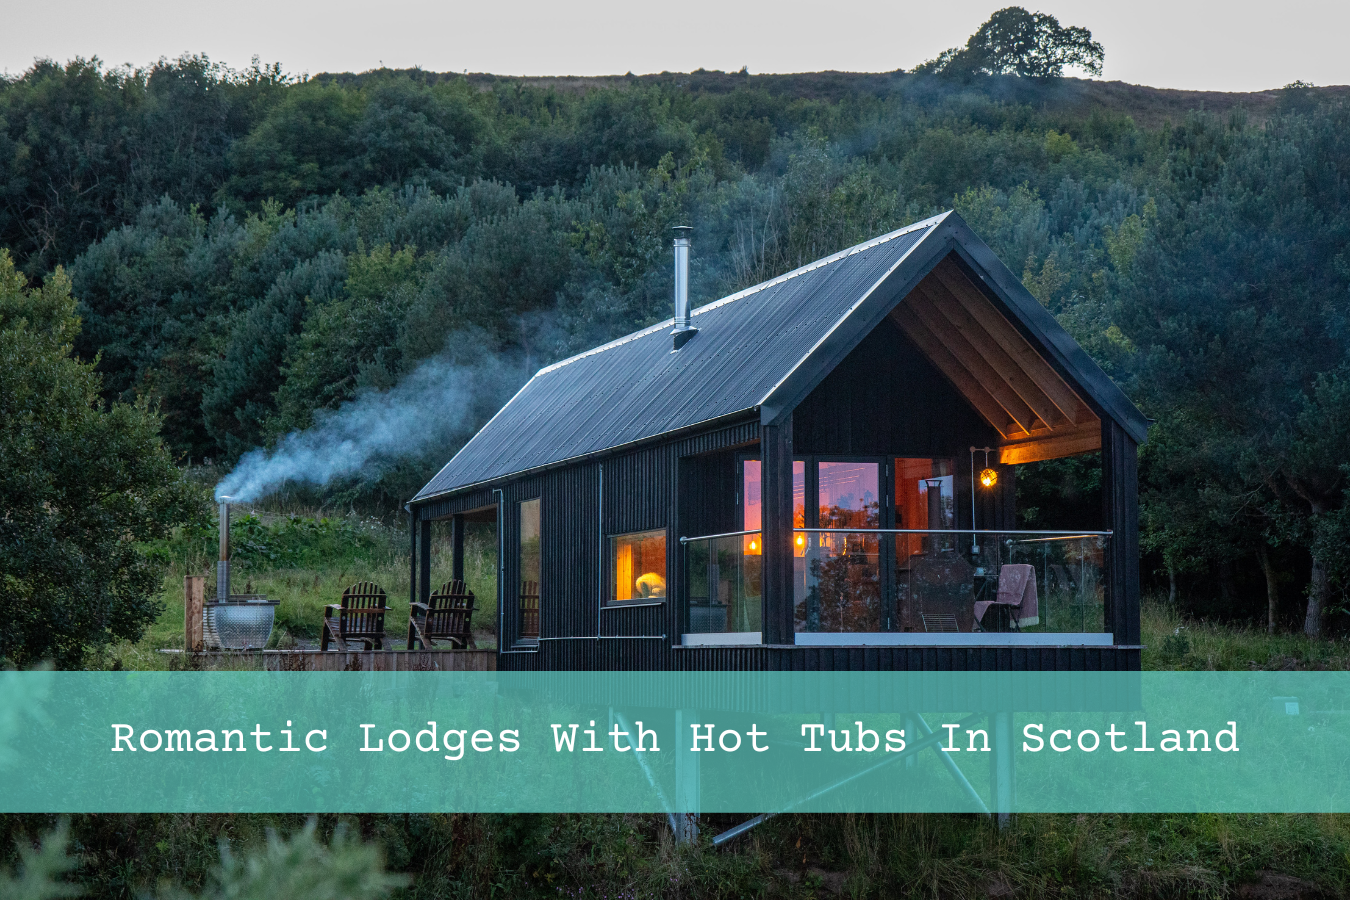 Romantic Lodges With Hot Tubs Scotland (Photo - Bothan Dubh, Outfield Cabins)